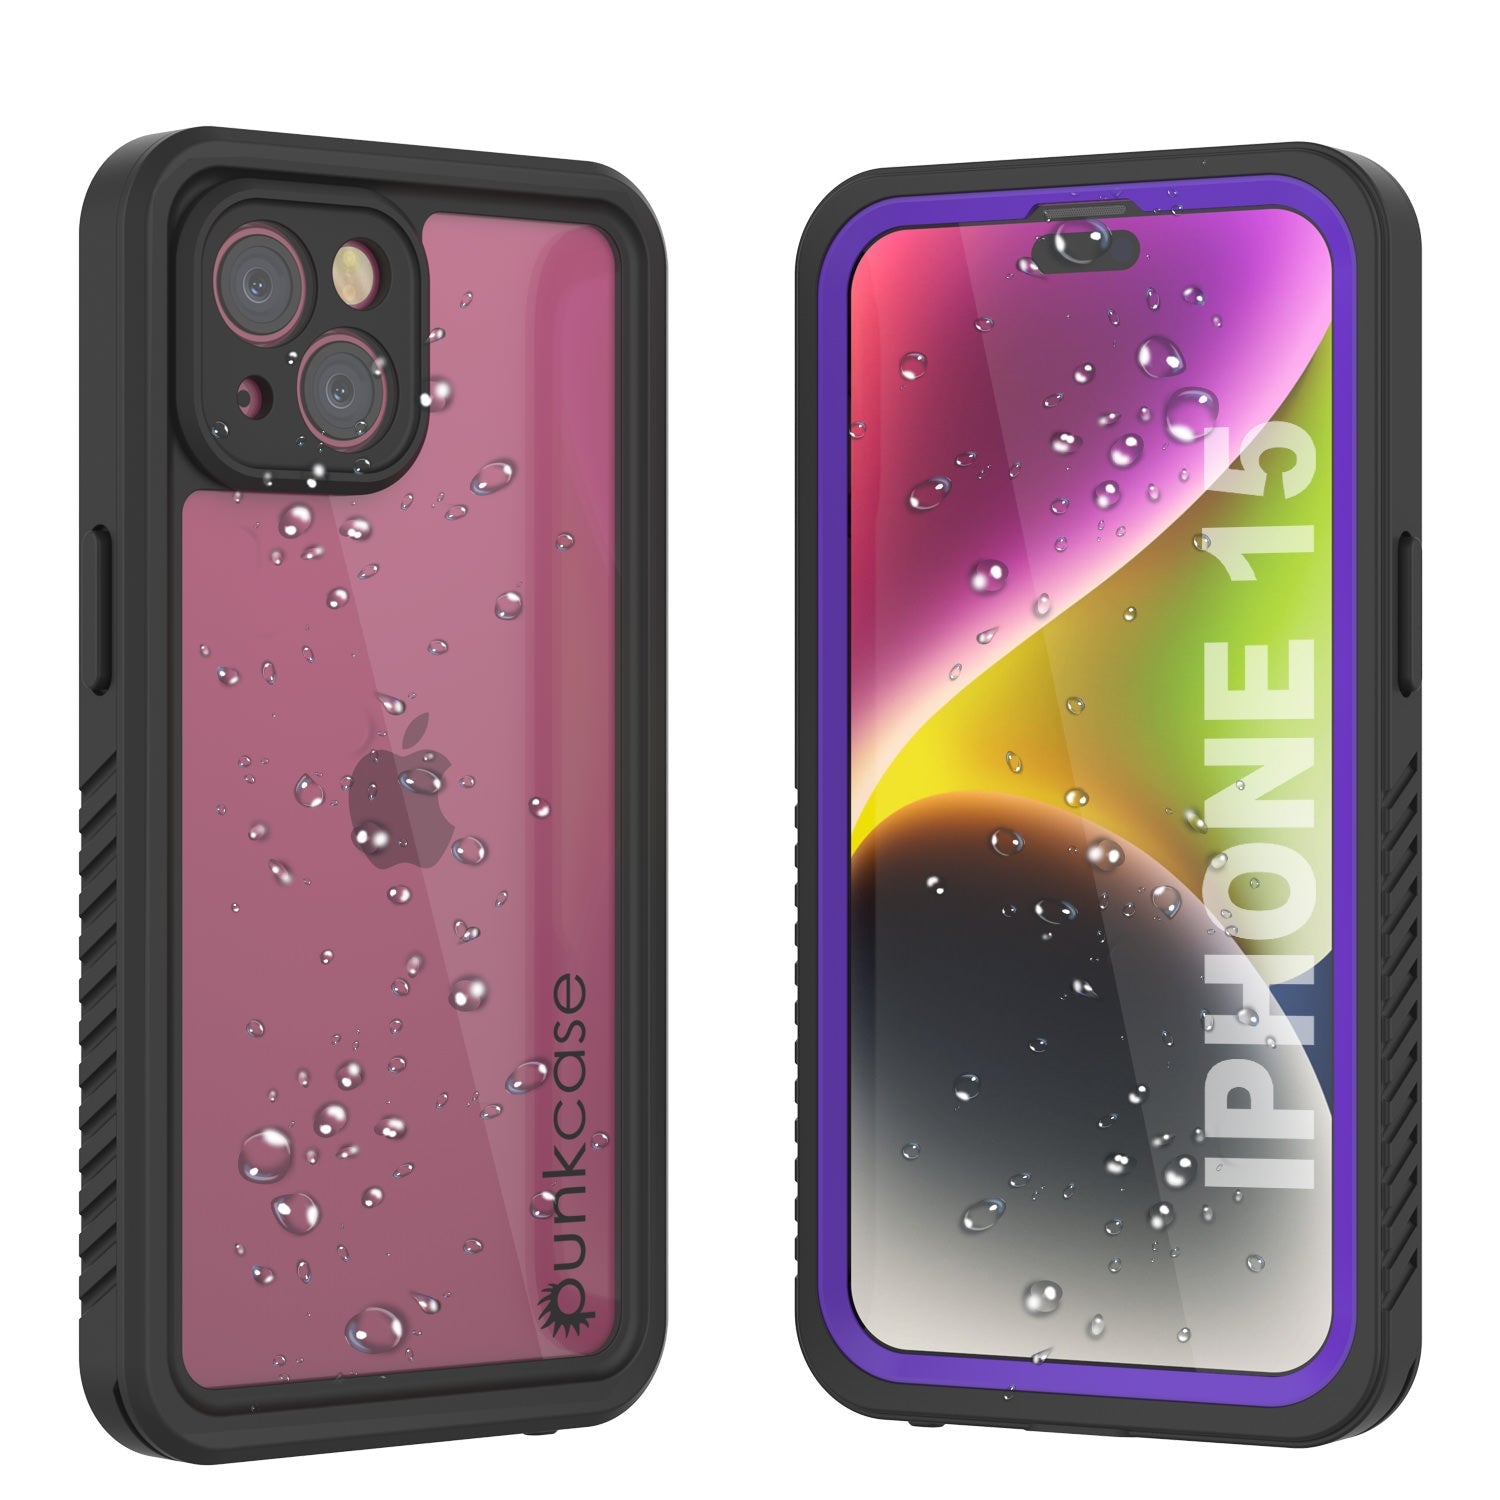 iPhone 15  Waterproof Case, Punkcase [Extreme Series] Armor Cover W/ Built In Screen Protector [Purple]